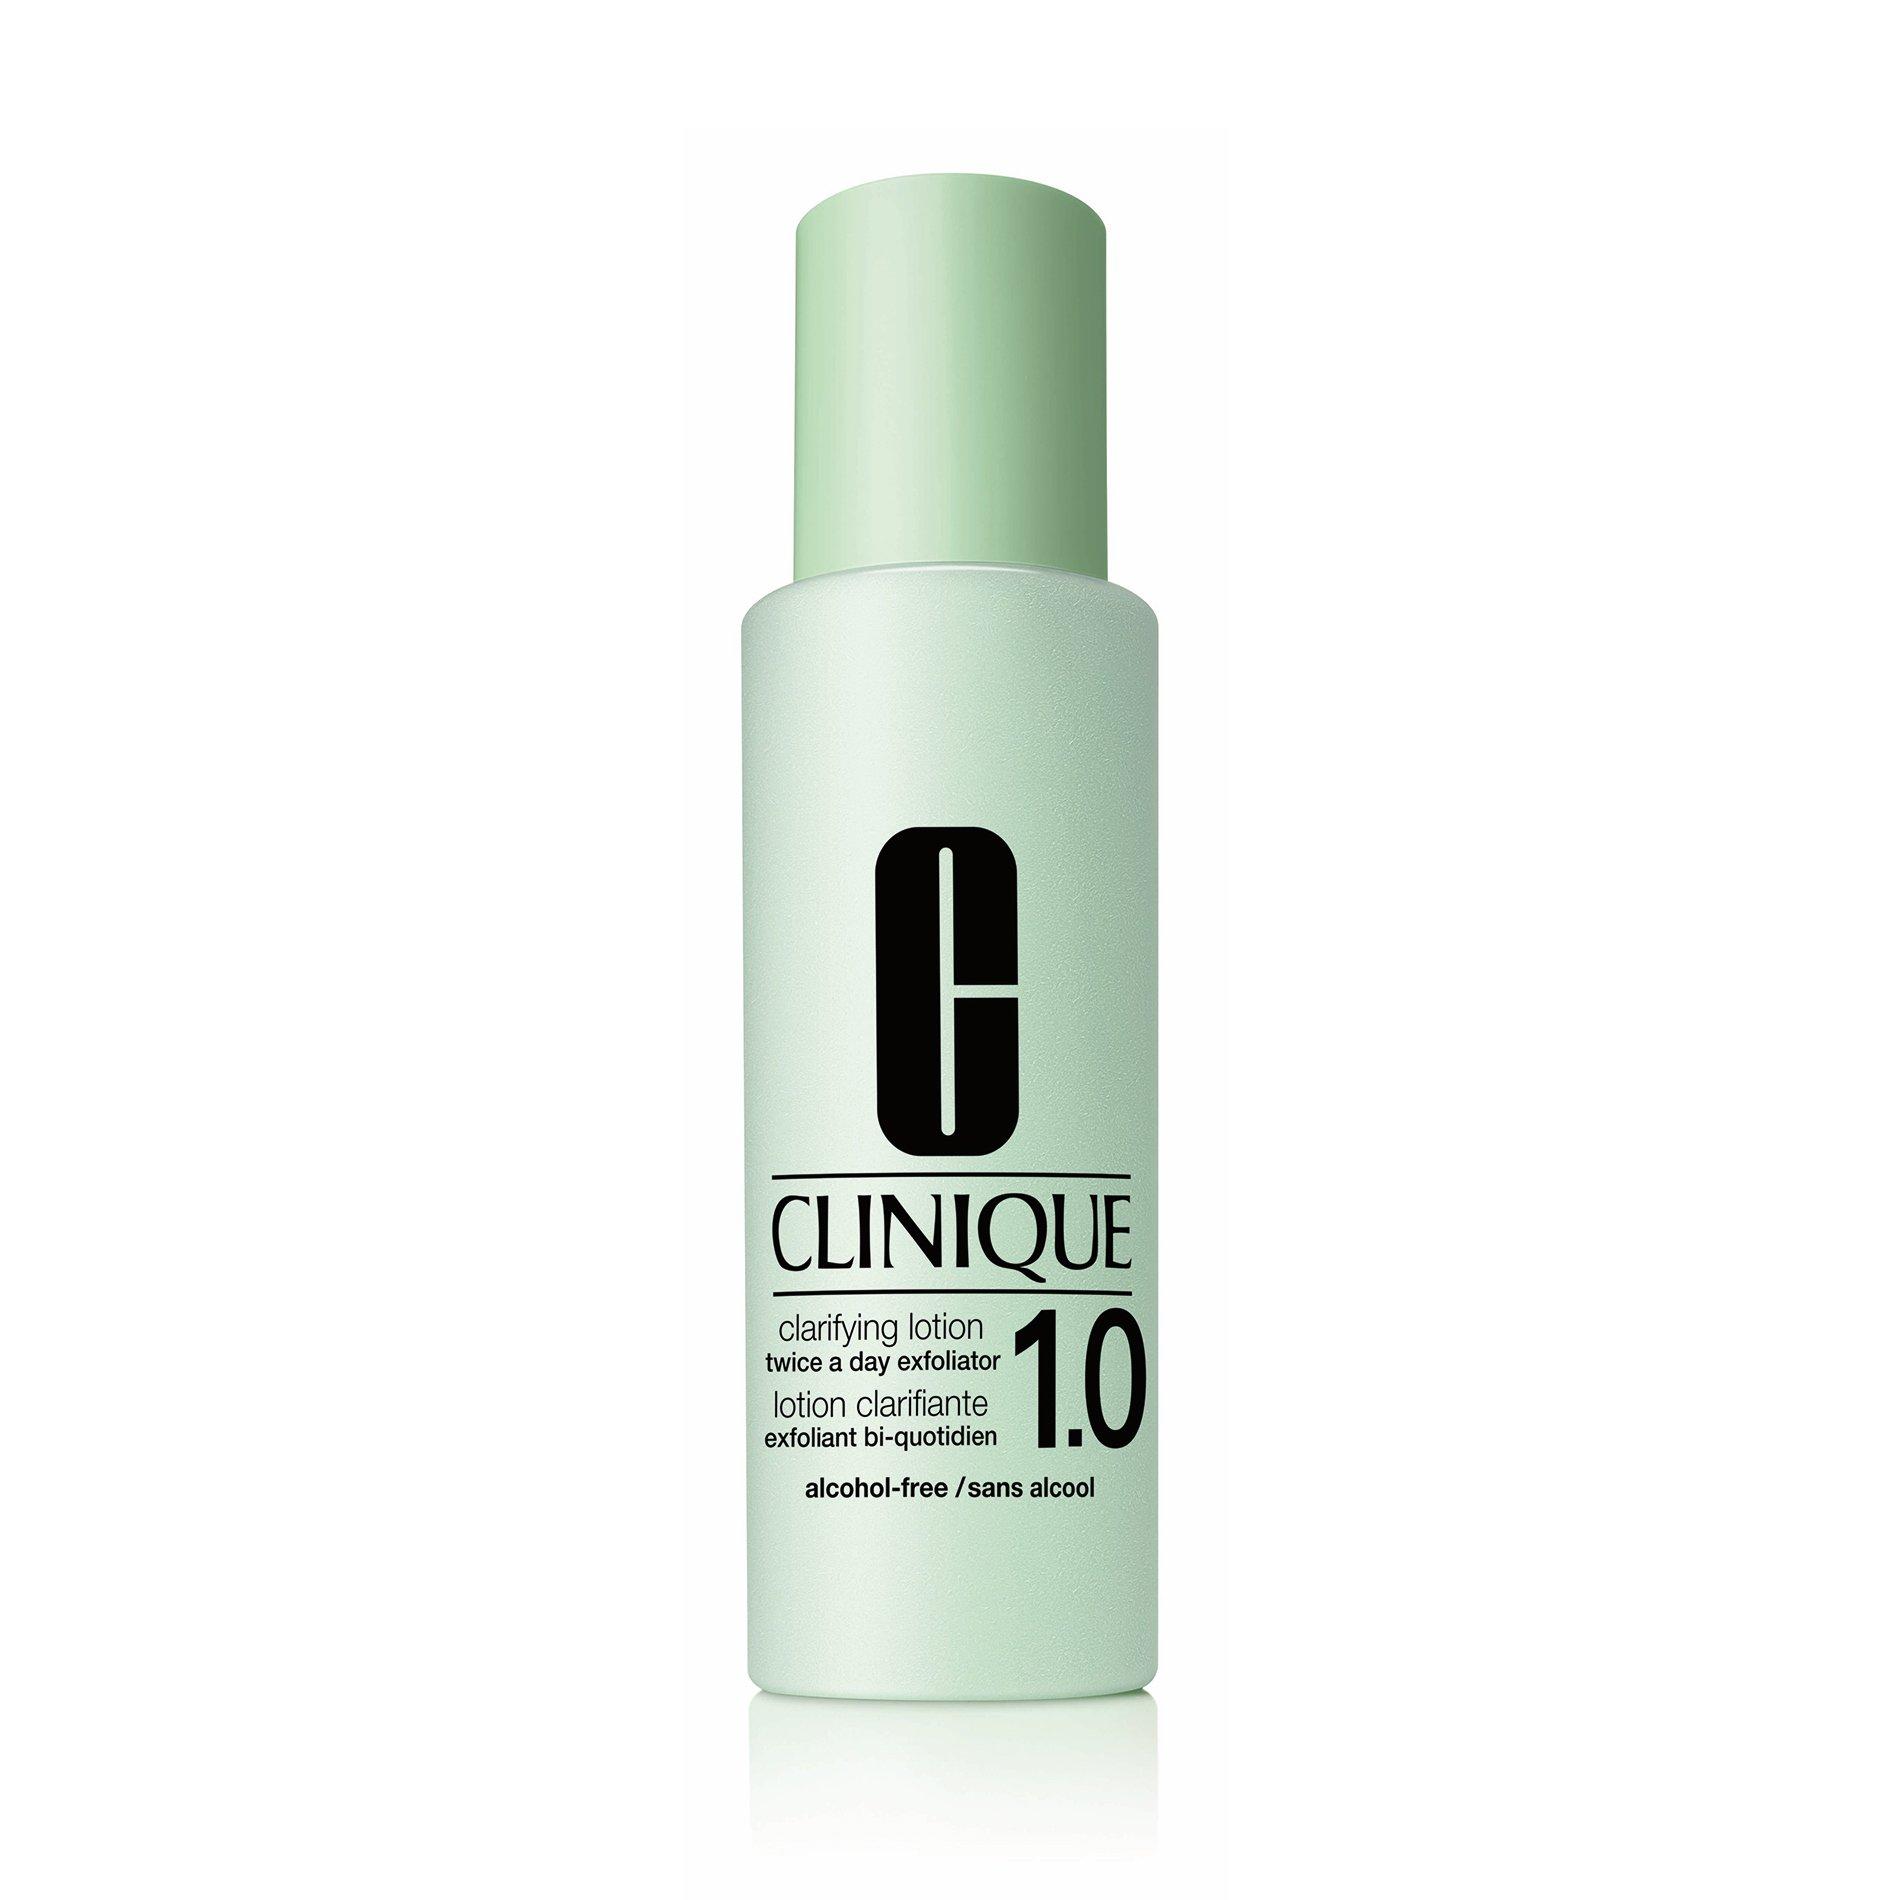 CLINIQUE 3 Step Clarifying Lotion 1.0 